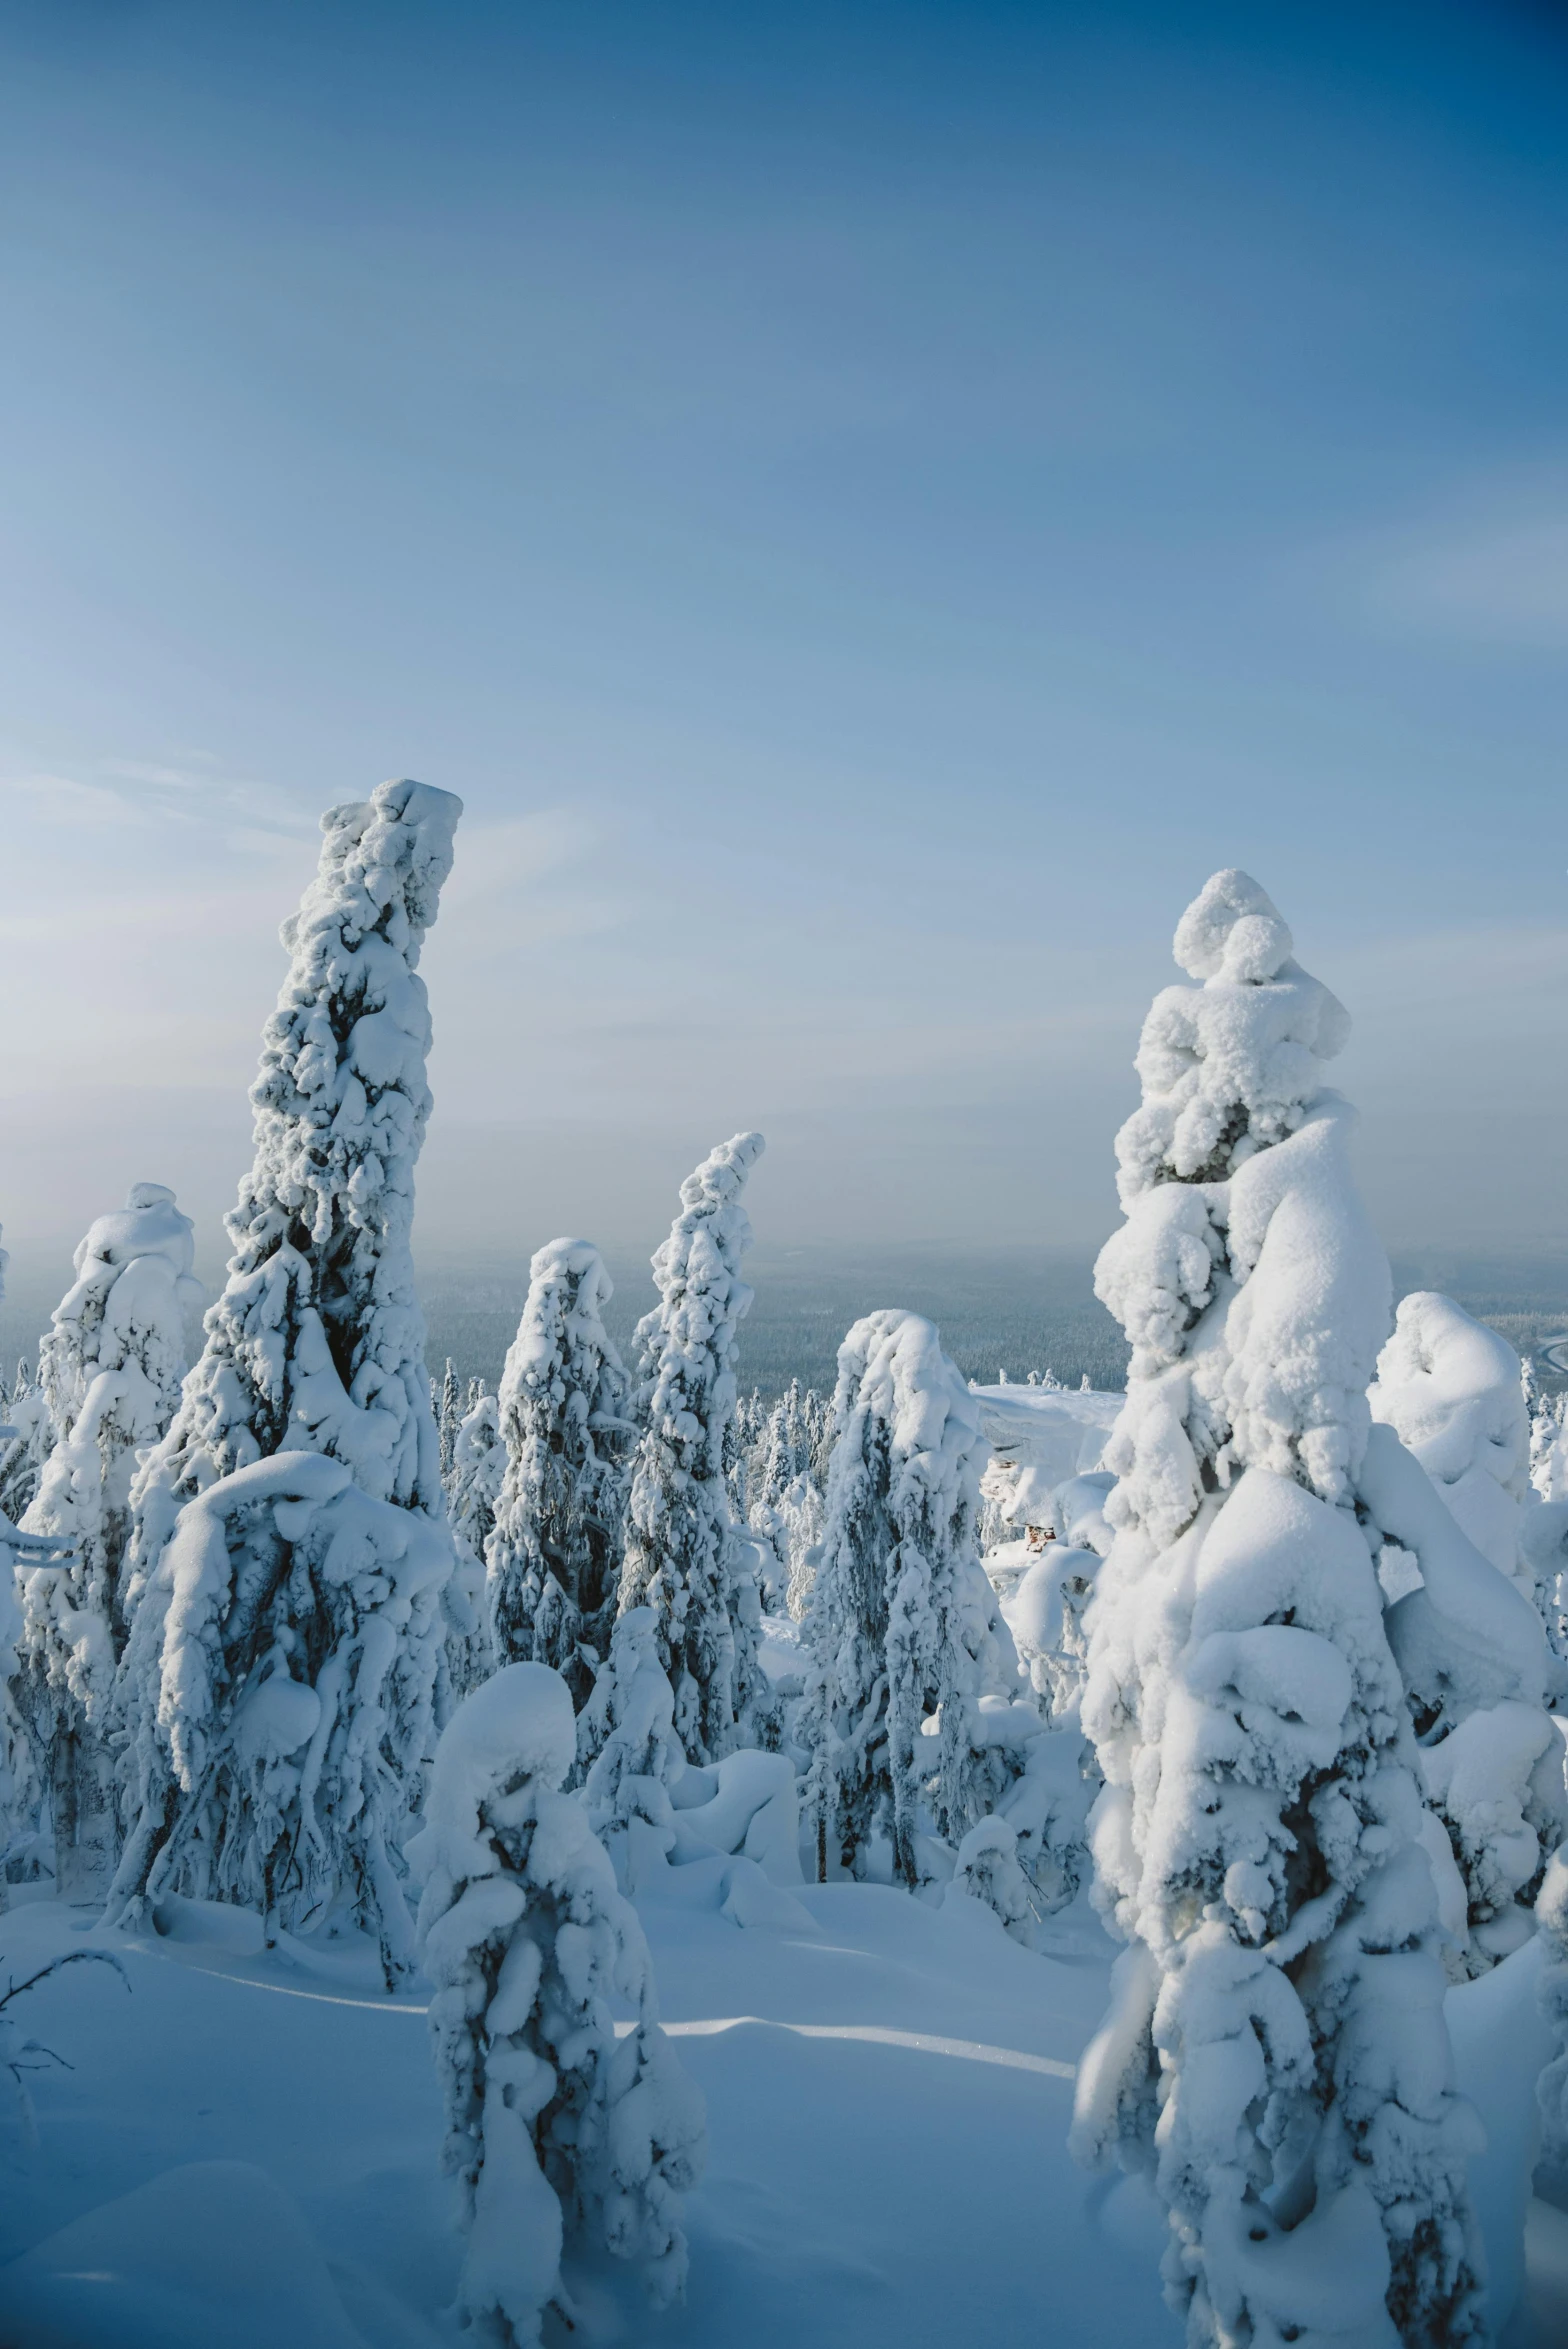 a man riding a snowboard down a snow covered slope, inspired by Einar Hakonarson, pexels contest winner, romanticism, spruce trees, panorama, lapland, spires